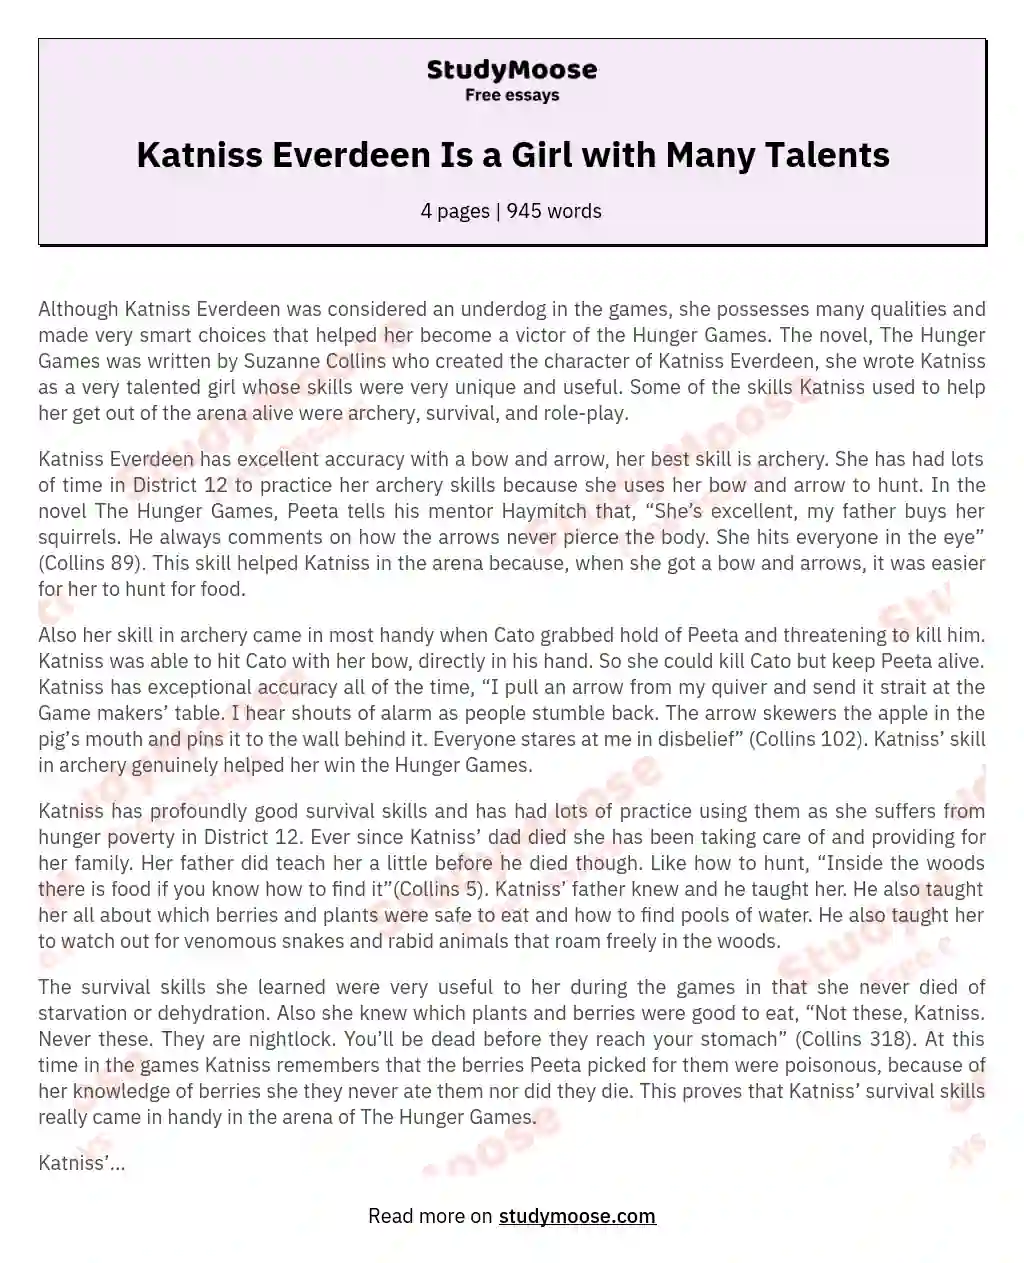 Katniss Everdeen Is a Girl with Many Talents essay